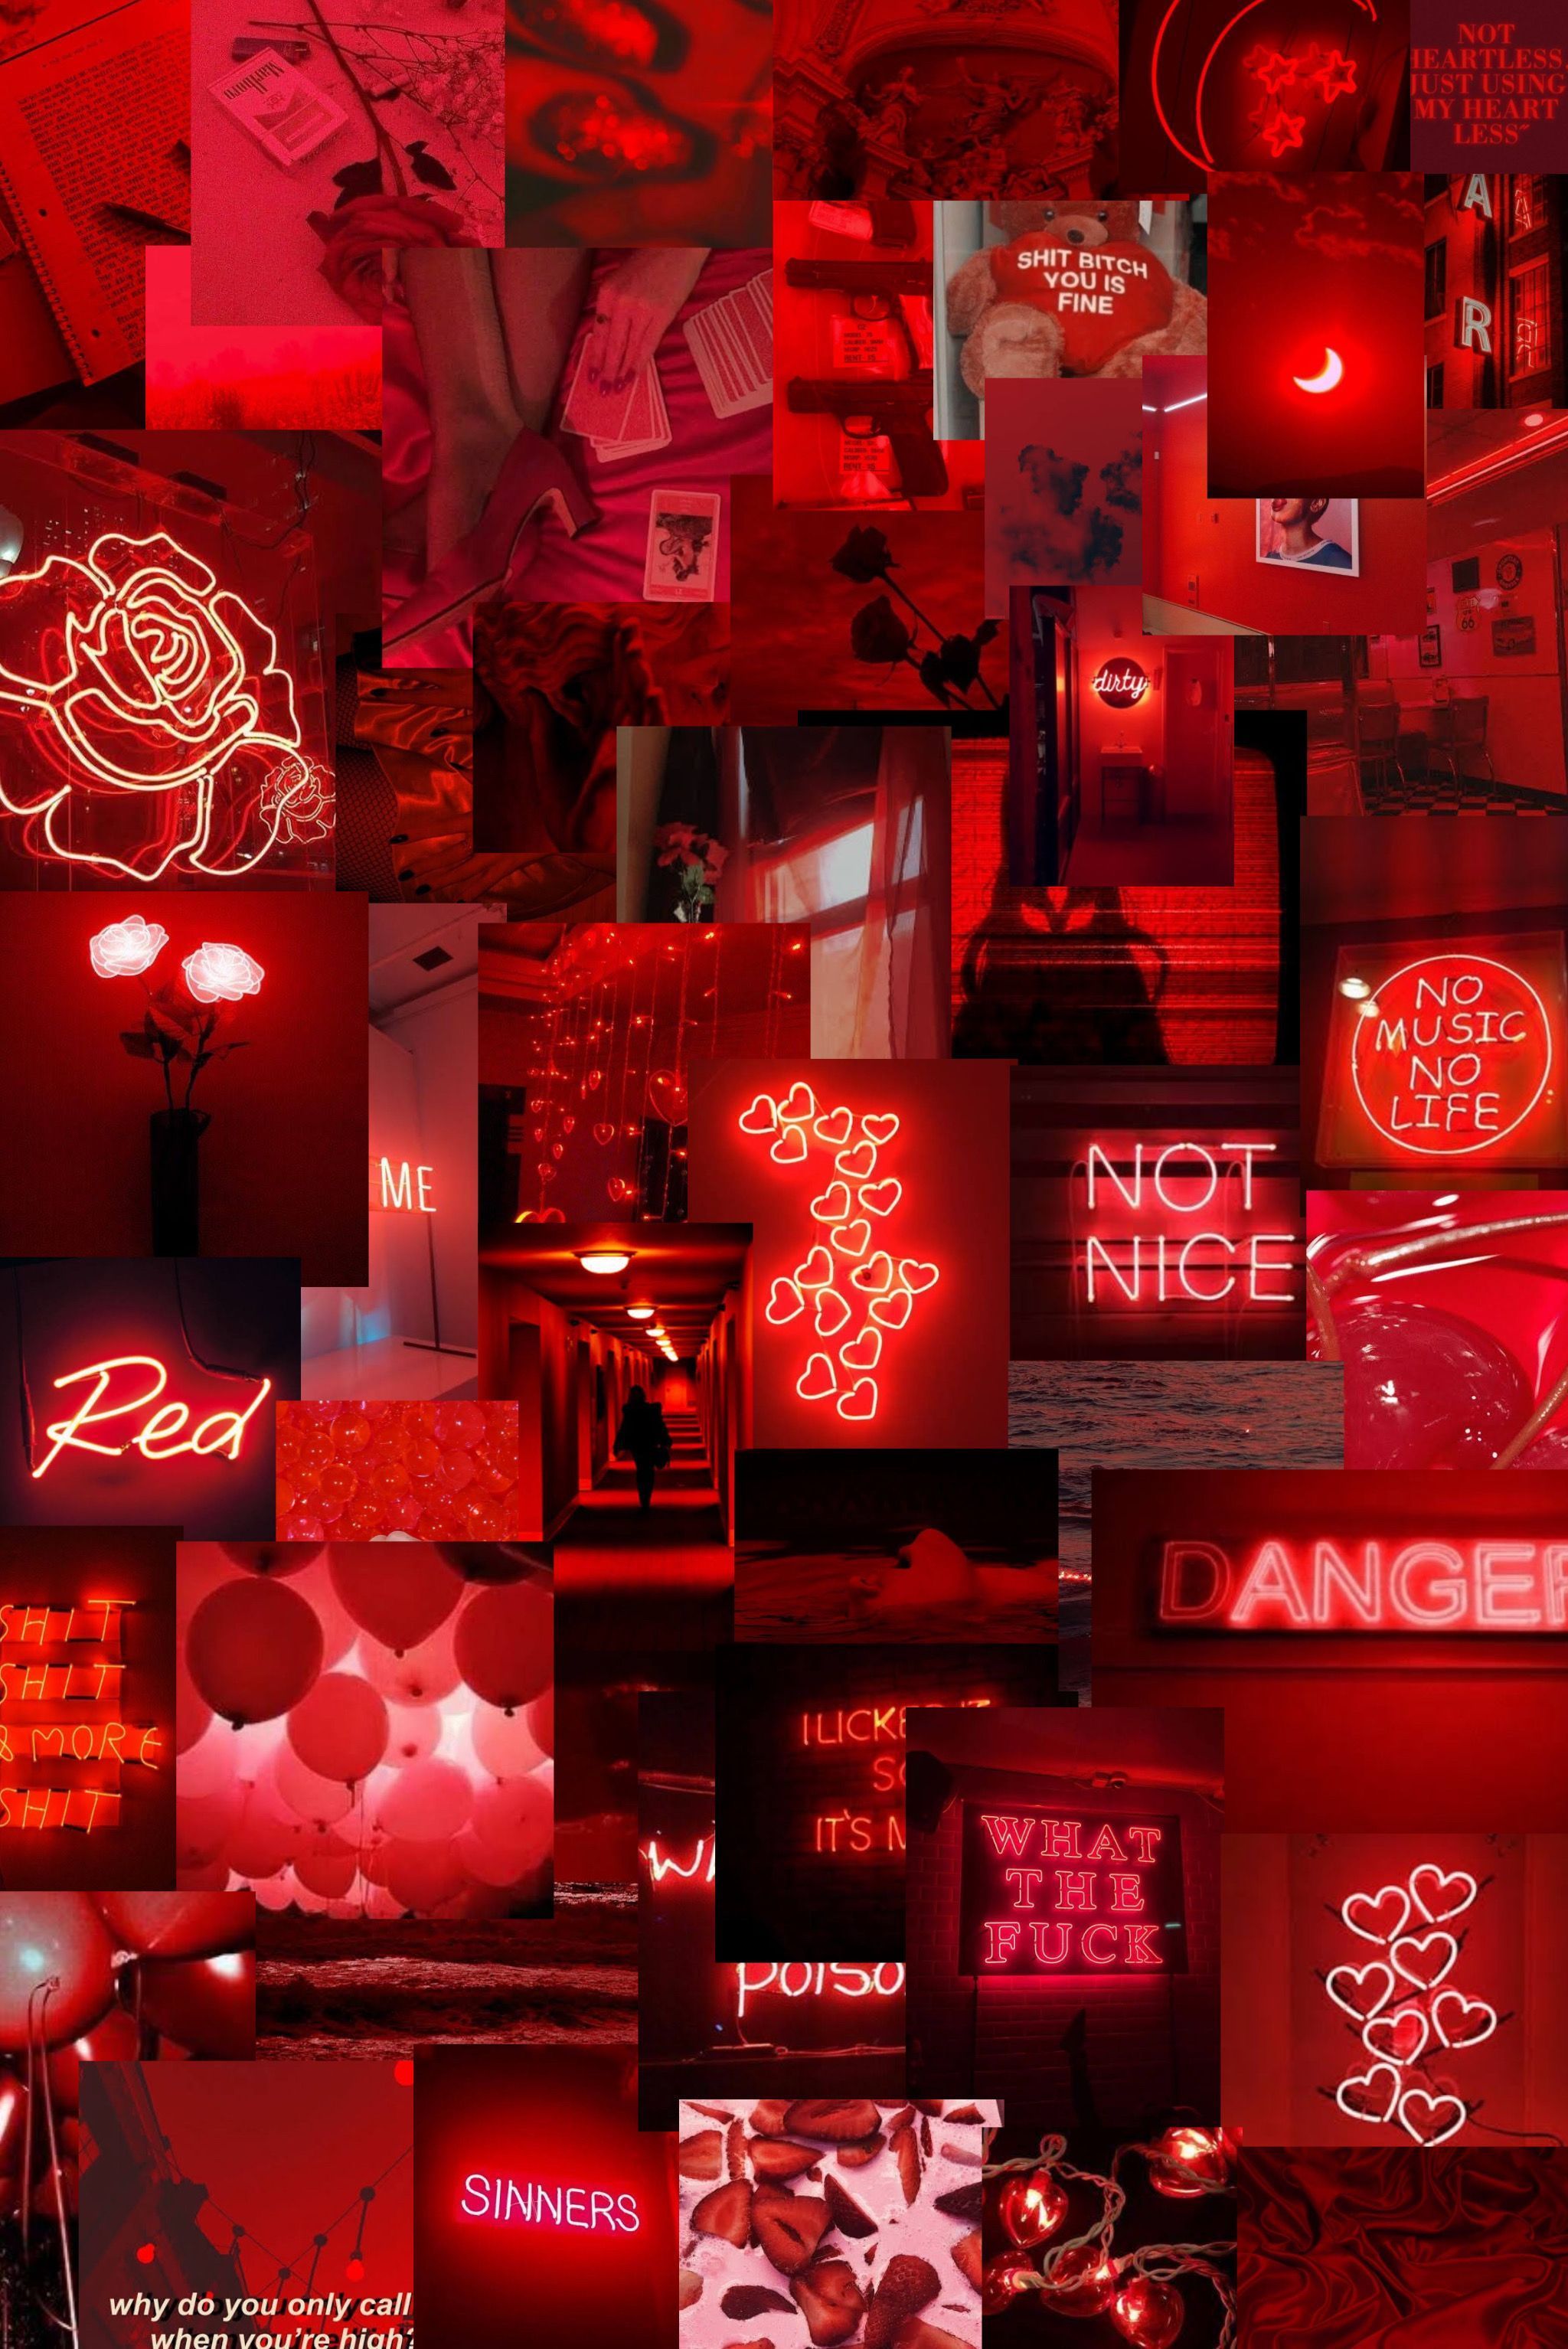 A collage of red neon signs and pictures - Red, light red, neon red